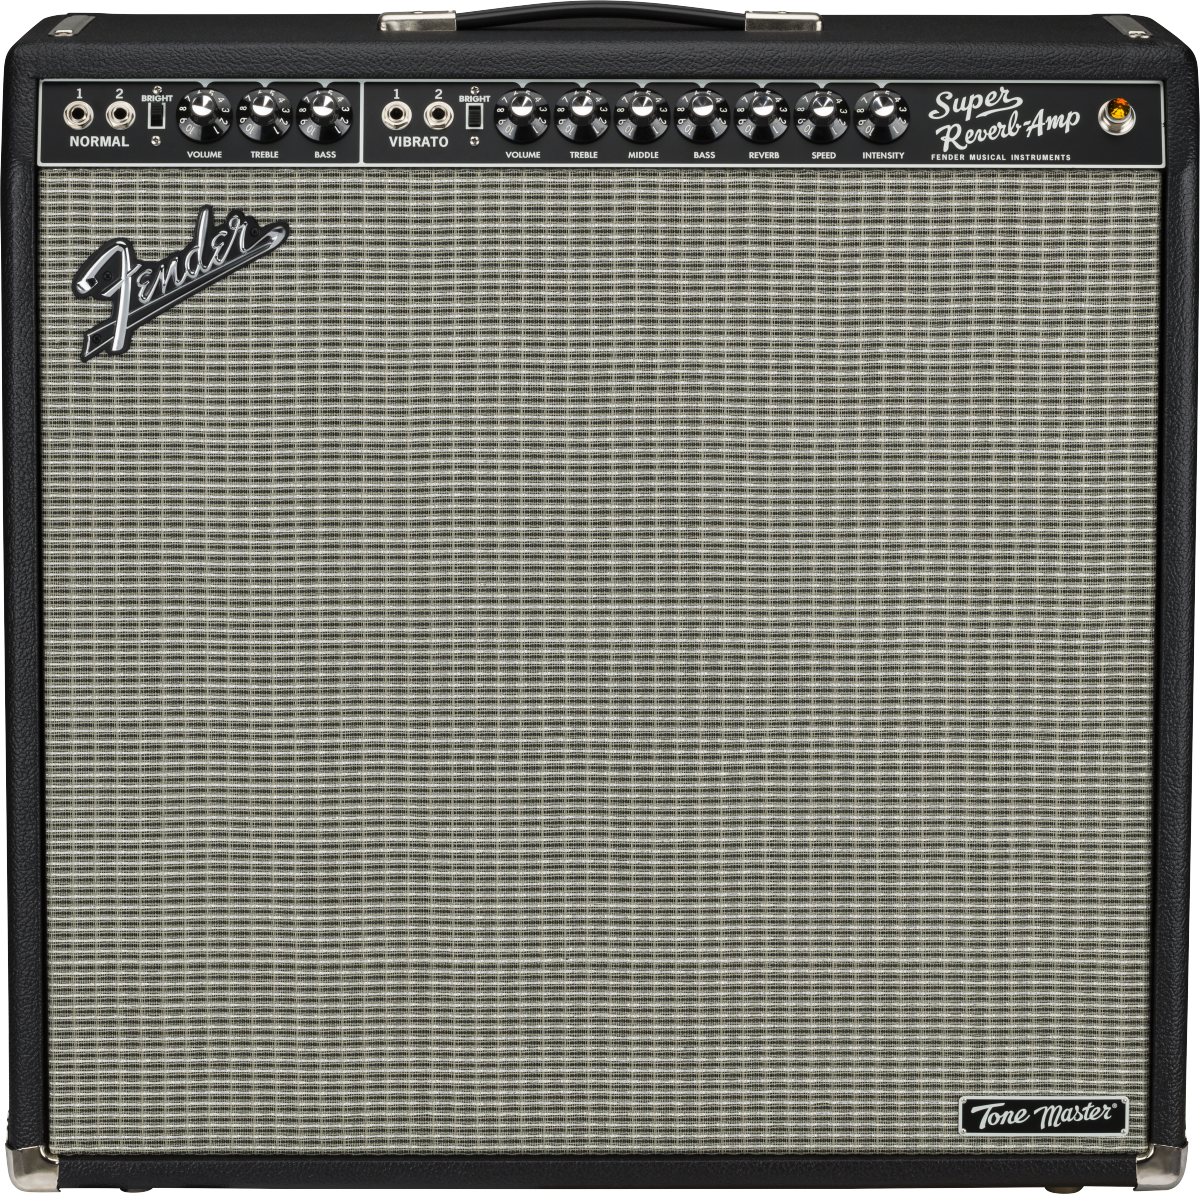 Fender Tone Master Super Reverb 200w 4x10 - Electric guitar combo amp - Main picture